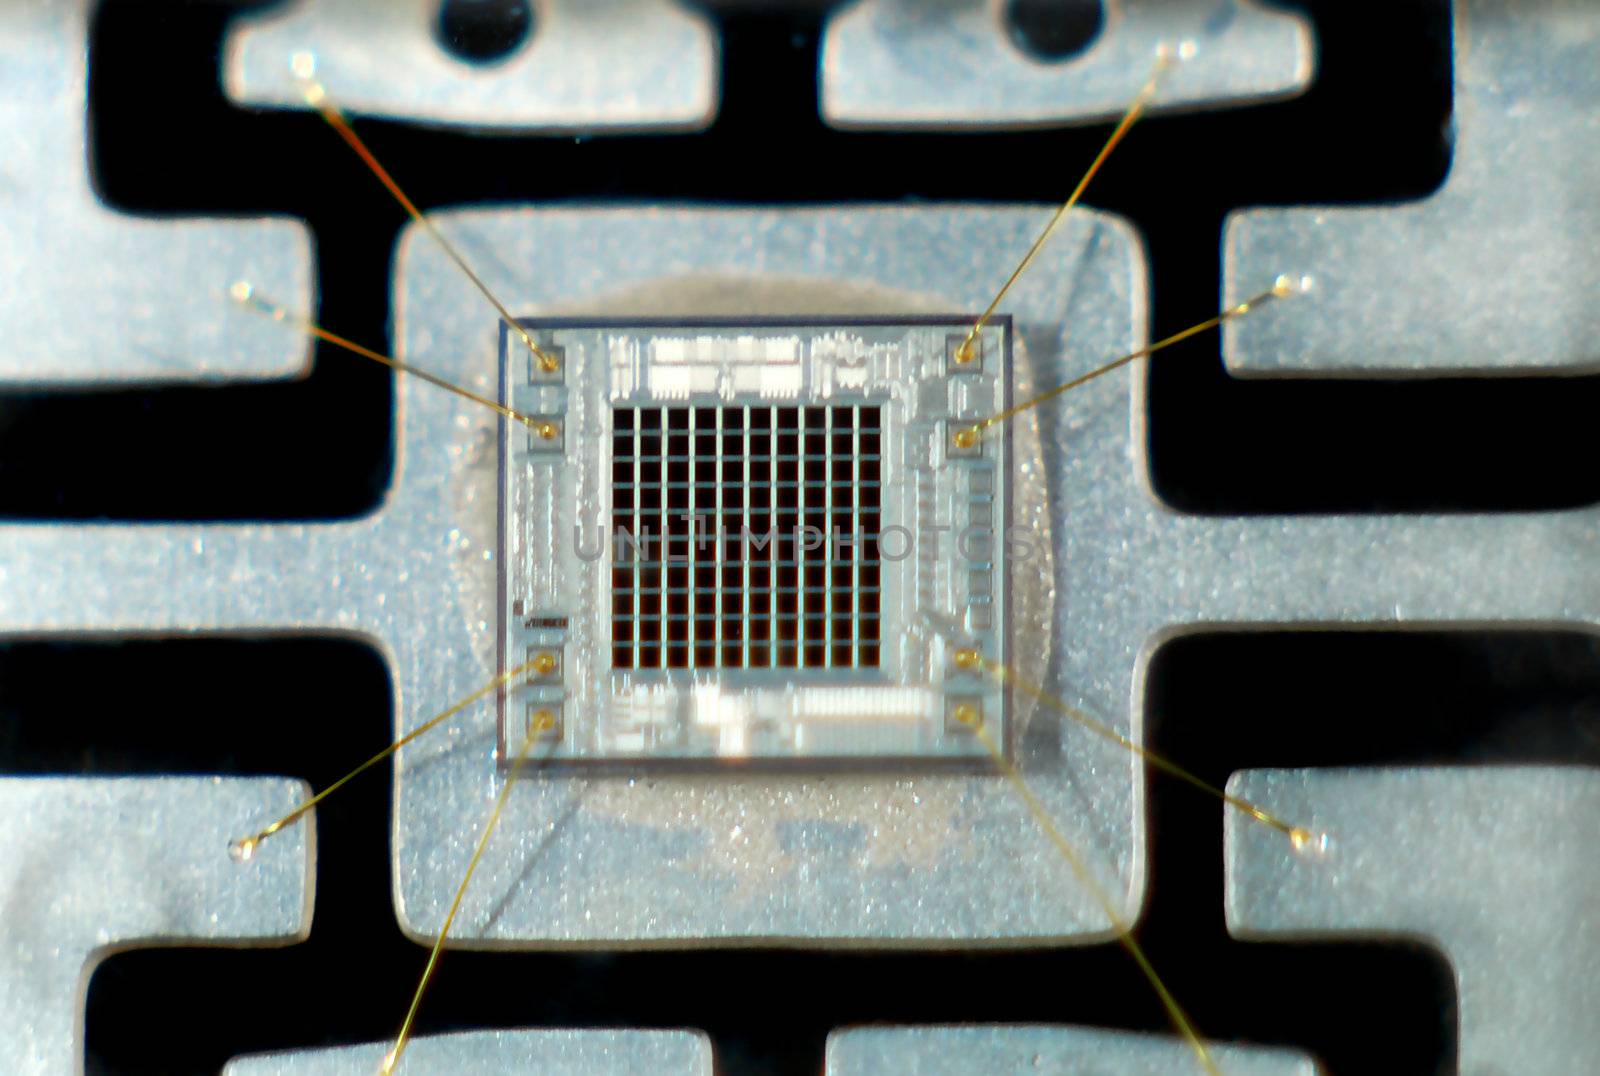 Stock pictures of computer and electronic chips